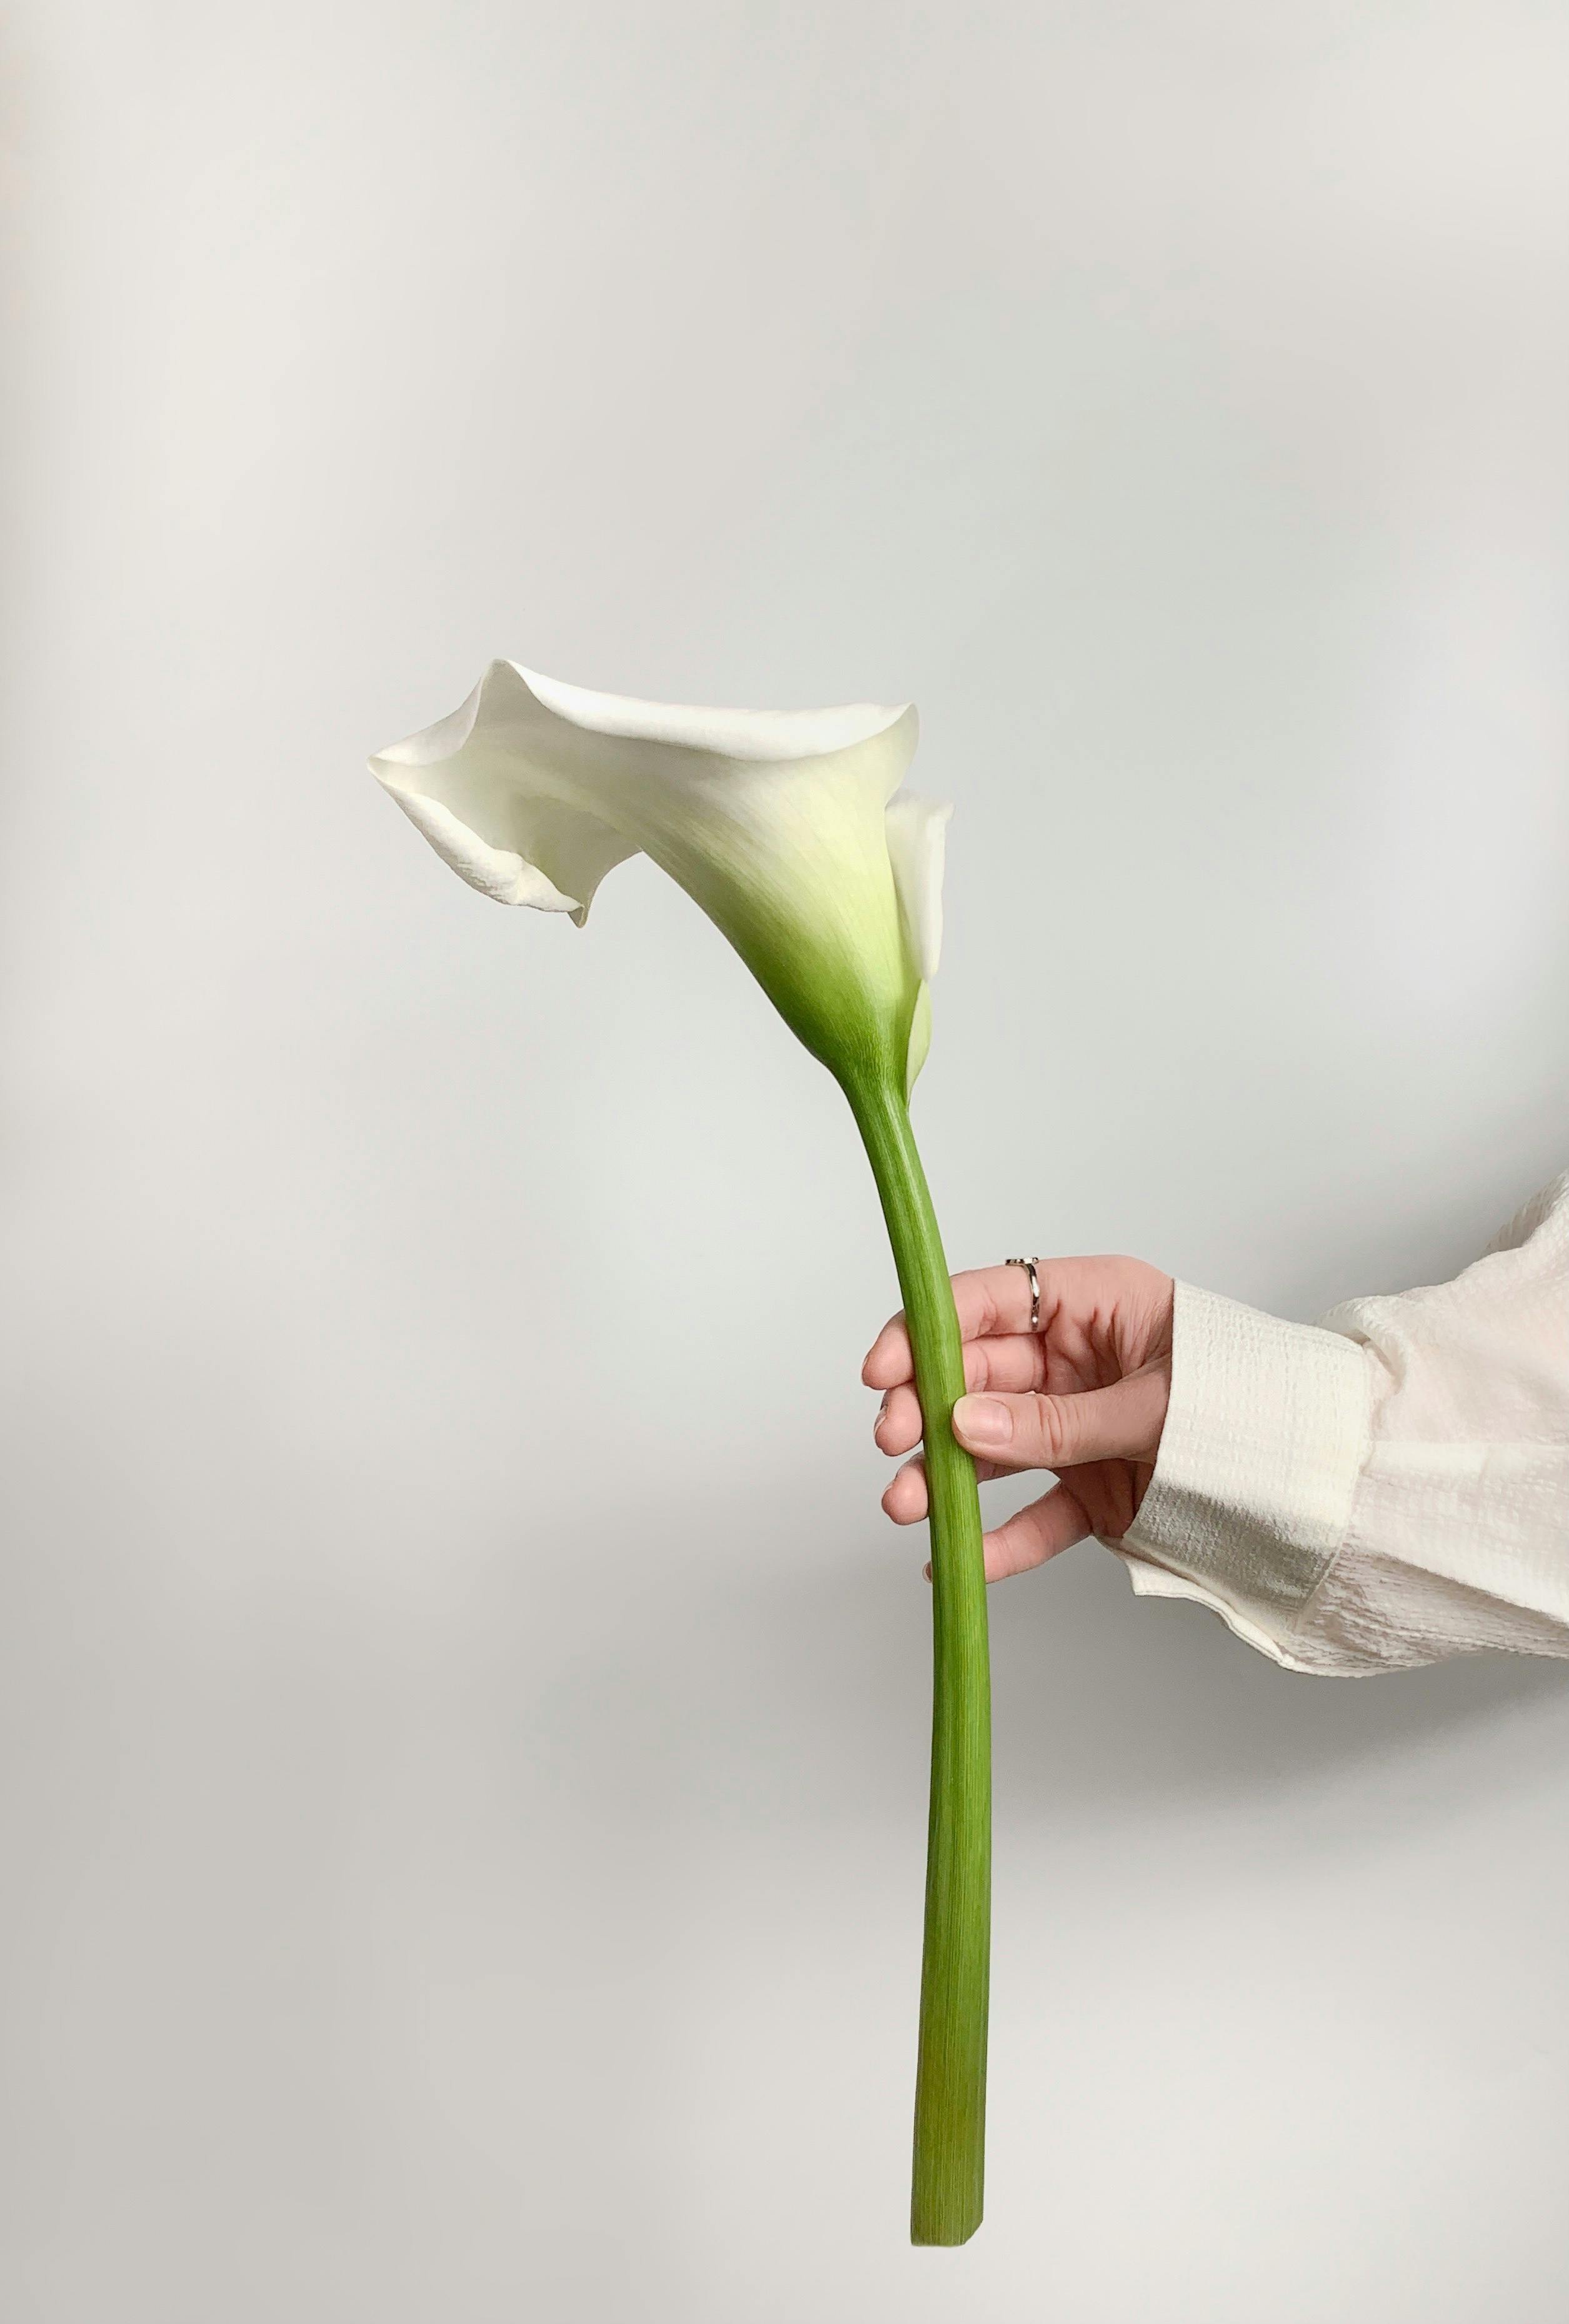 20800 Calla Lily Stock Photos Pictures  RoyaltyFree Images  iStock  Calla  lily vector Calla lily icon Calla lily white background